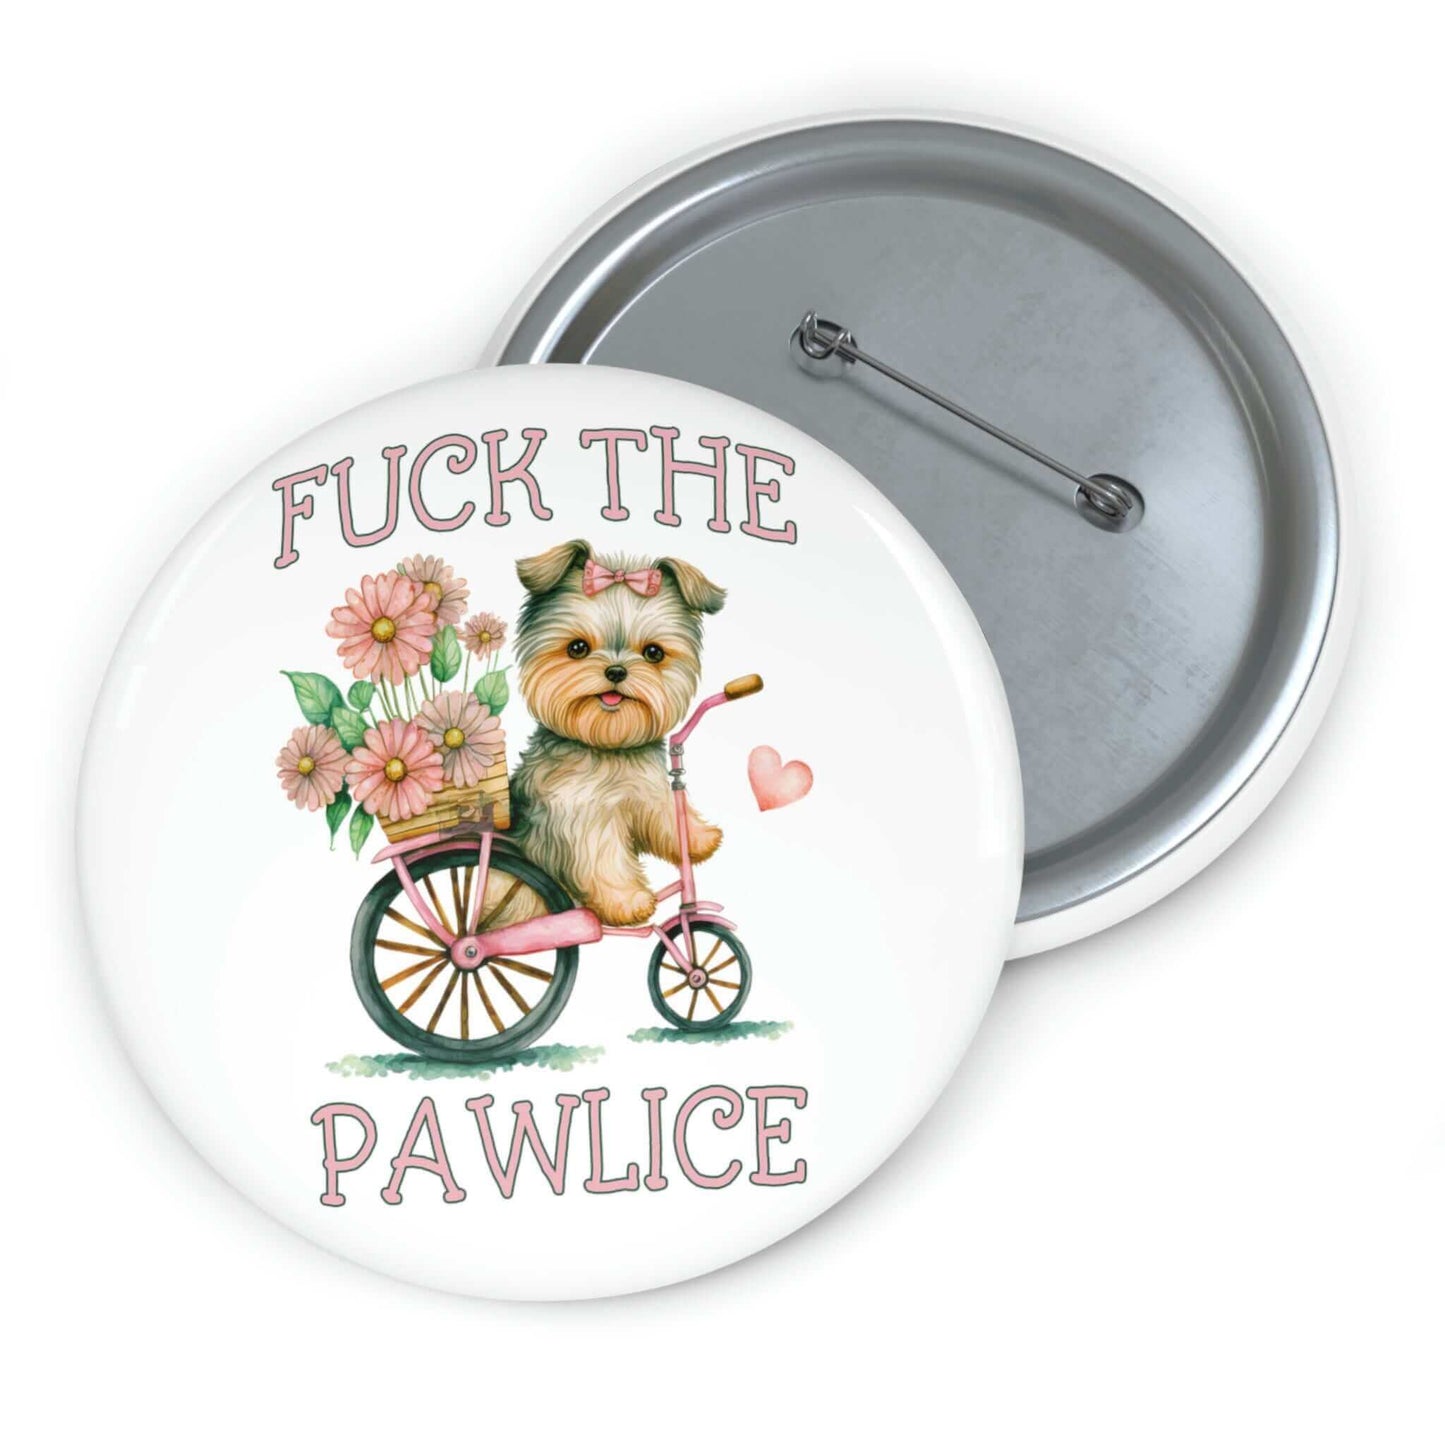 Fuck the pawlice cute puppy pin-back button